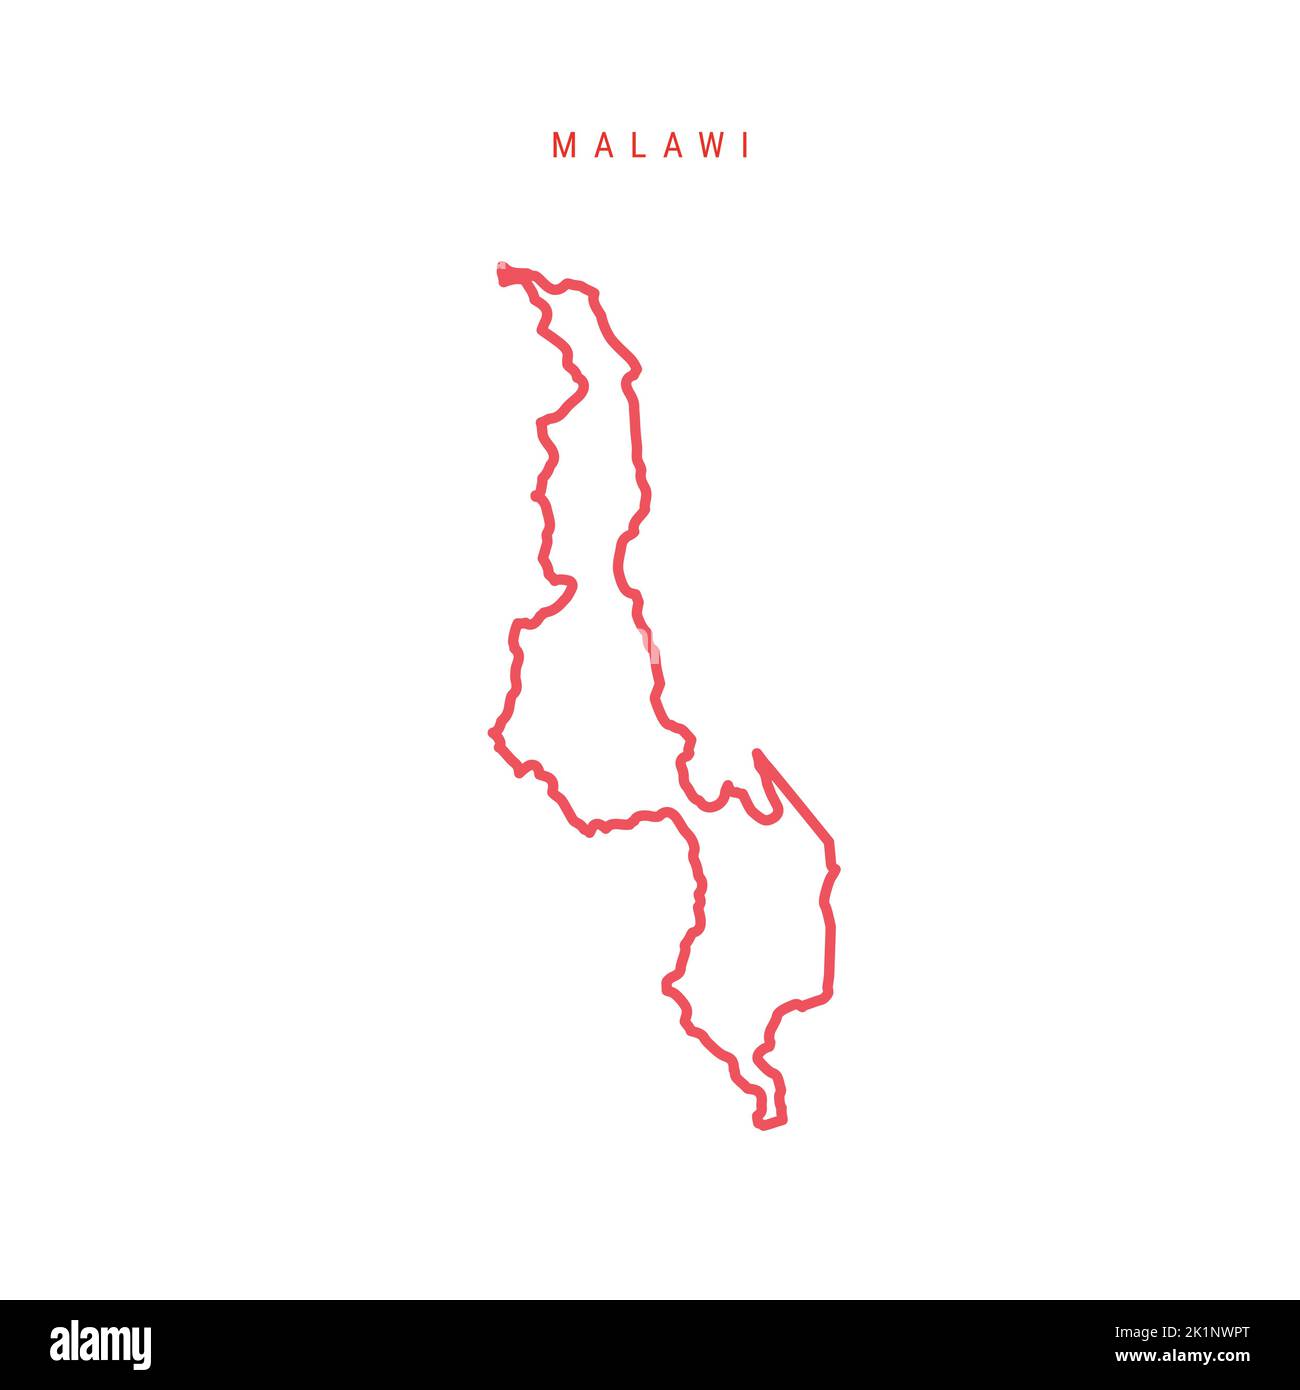 Malawi editable outline map. Malawian red border. Country name. Adjust line weight. Change to any color. Vector illustration. Stock Vector